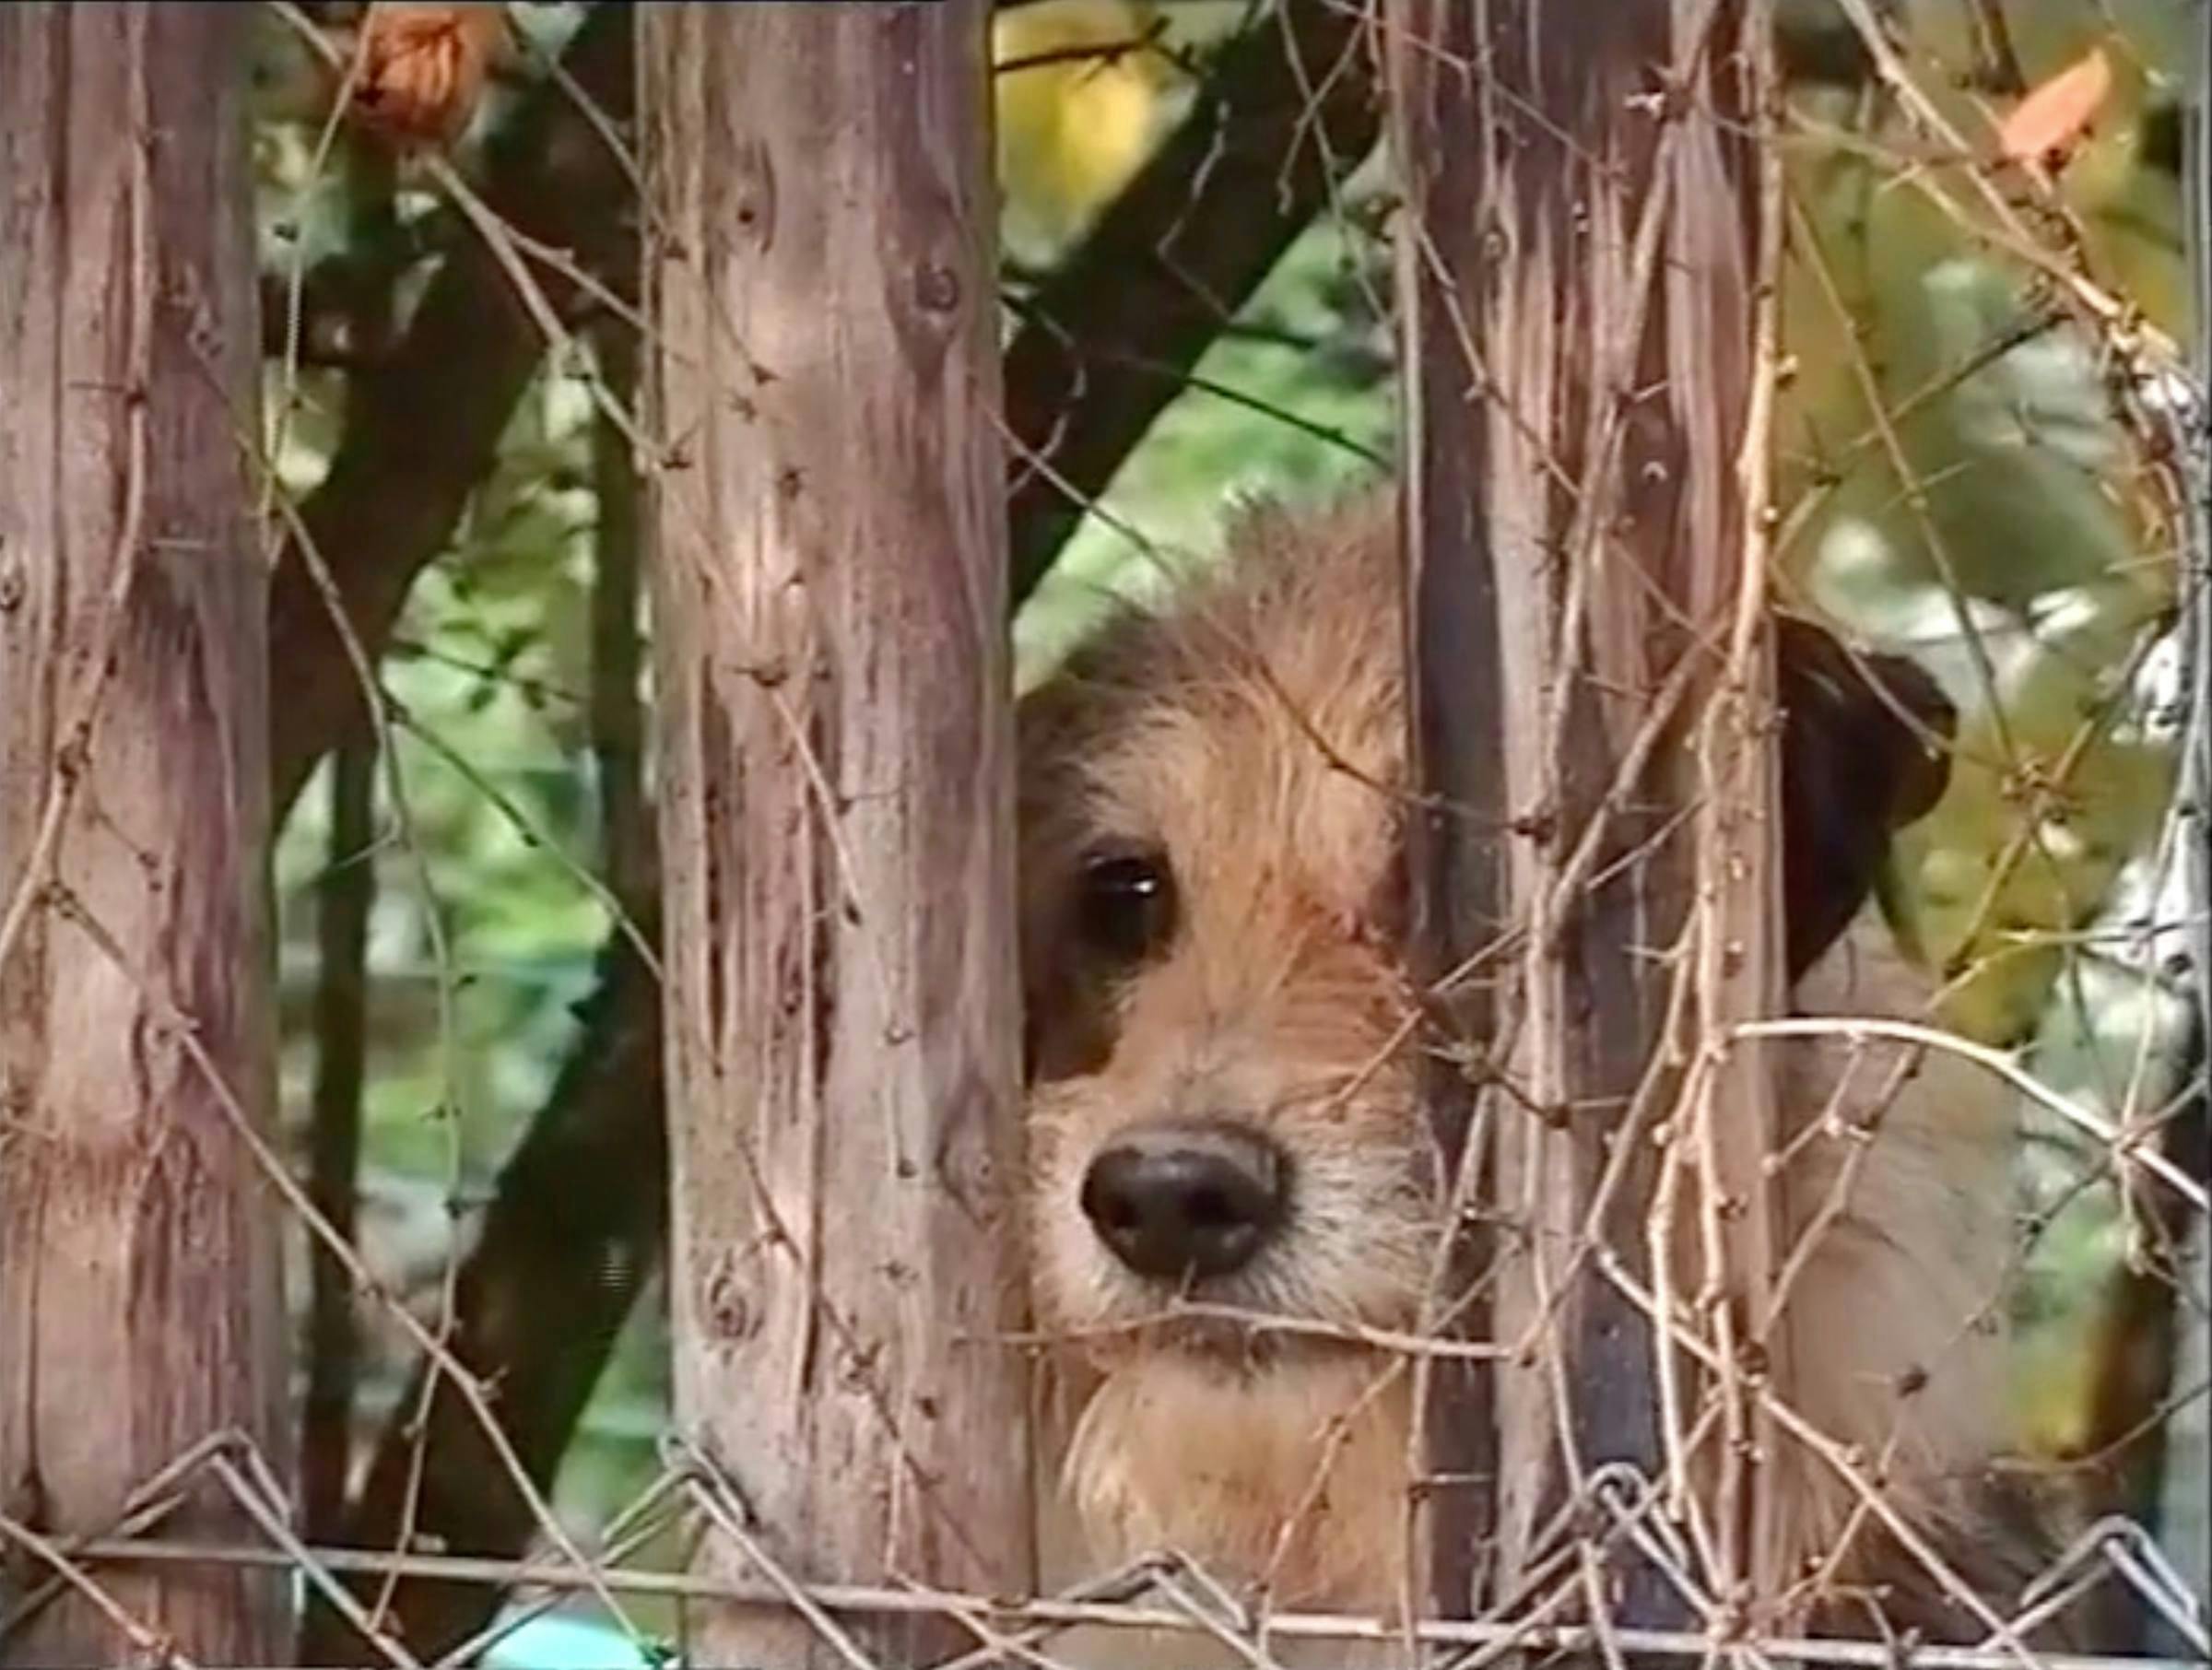 Image of a dog behind a wooden fence, poking his nose through the slats